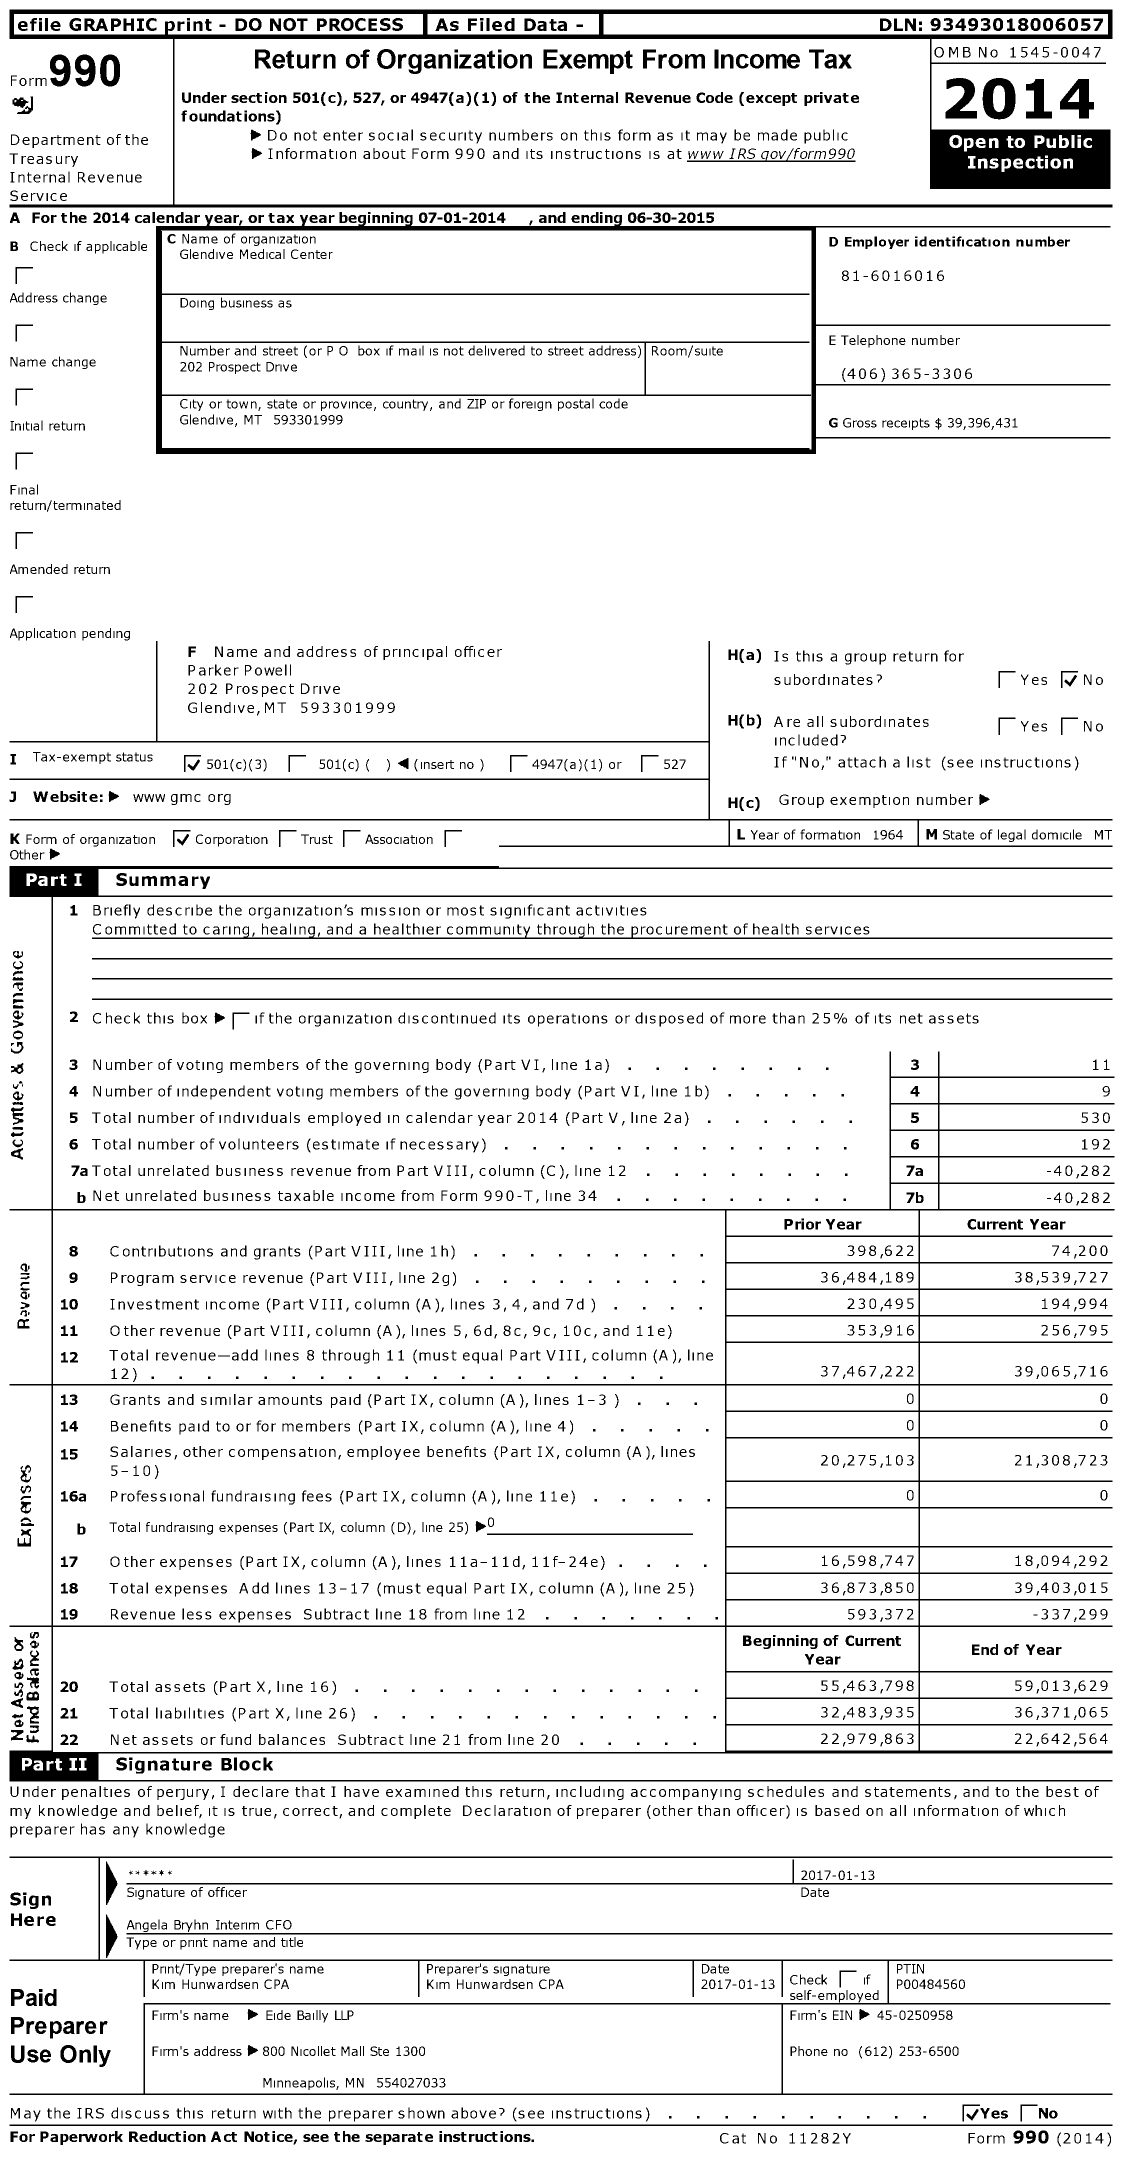 Image of first page of 2014 Form 990 for Glendive Medical Center (GMC)